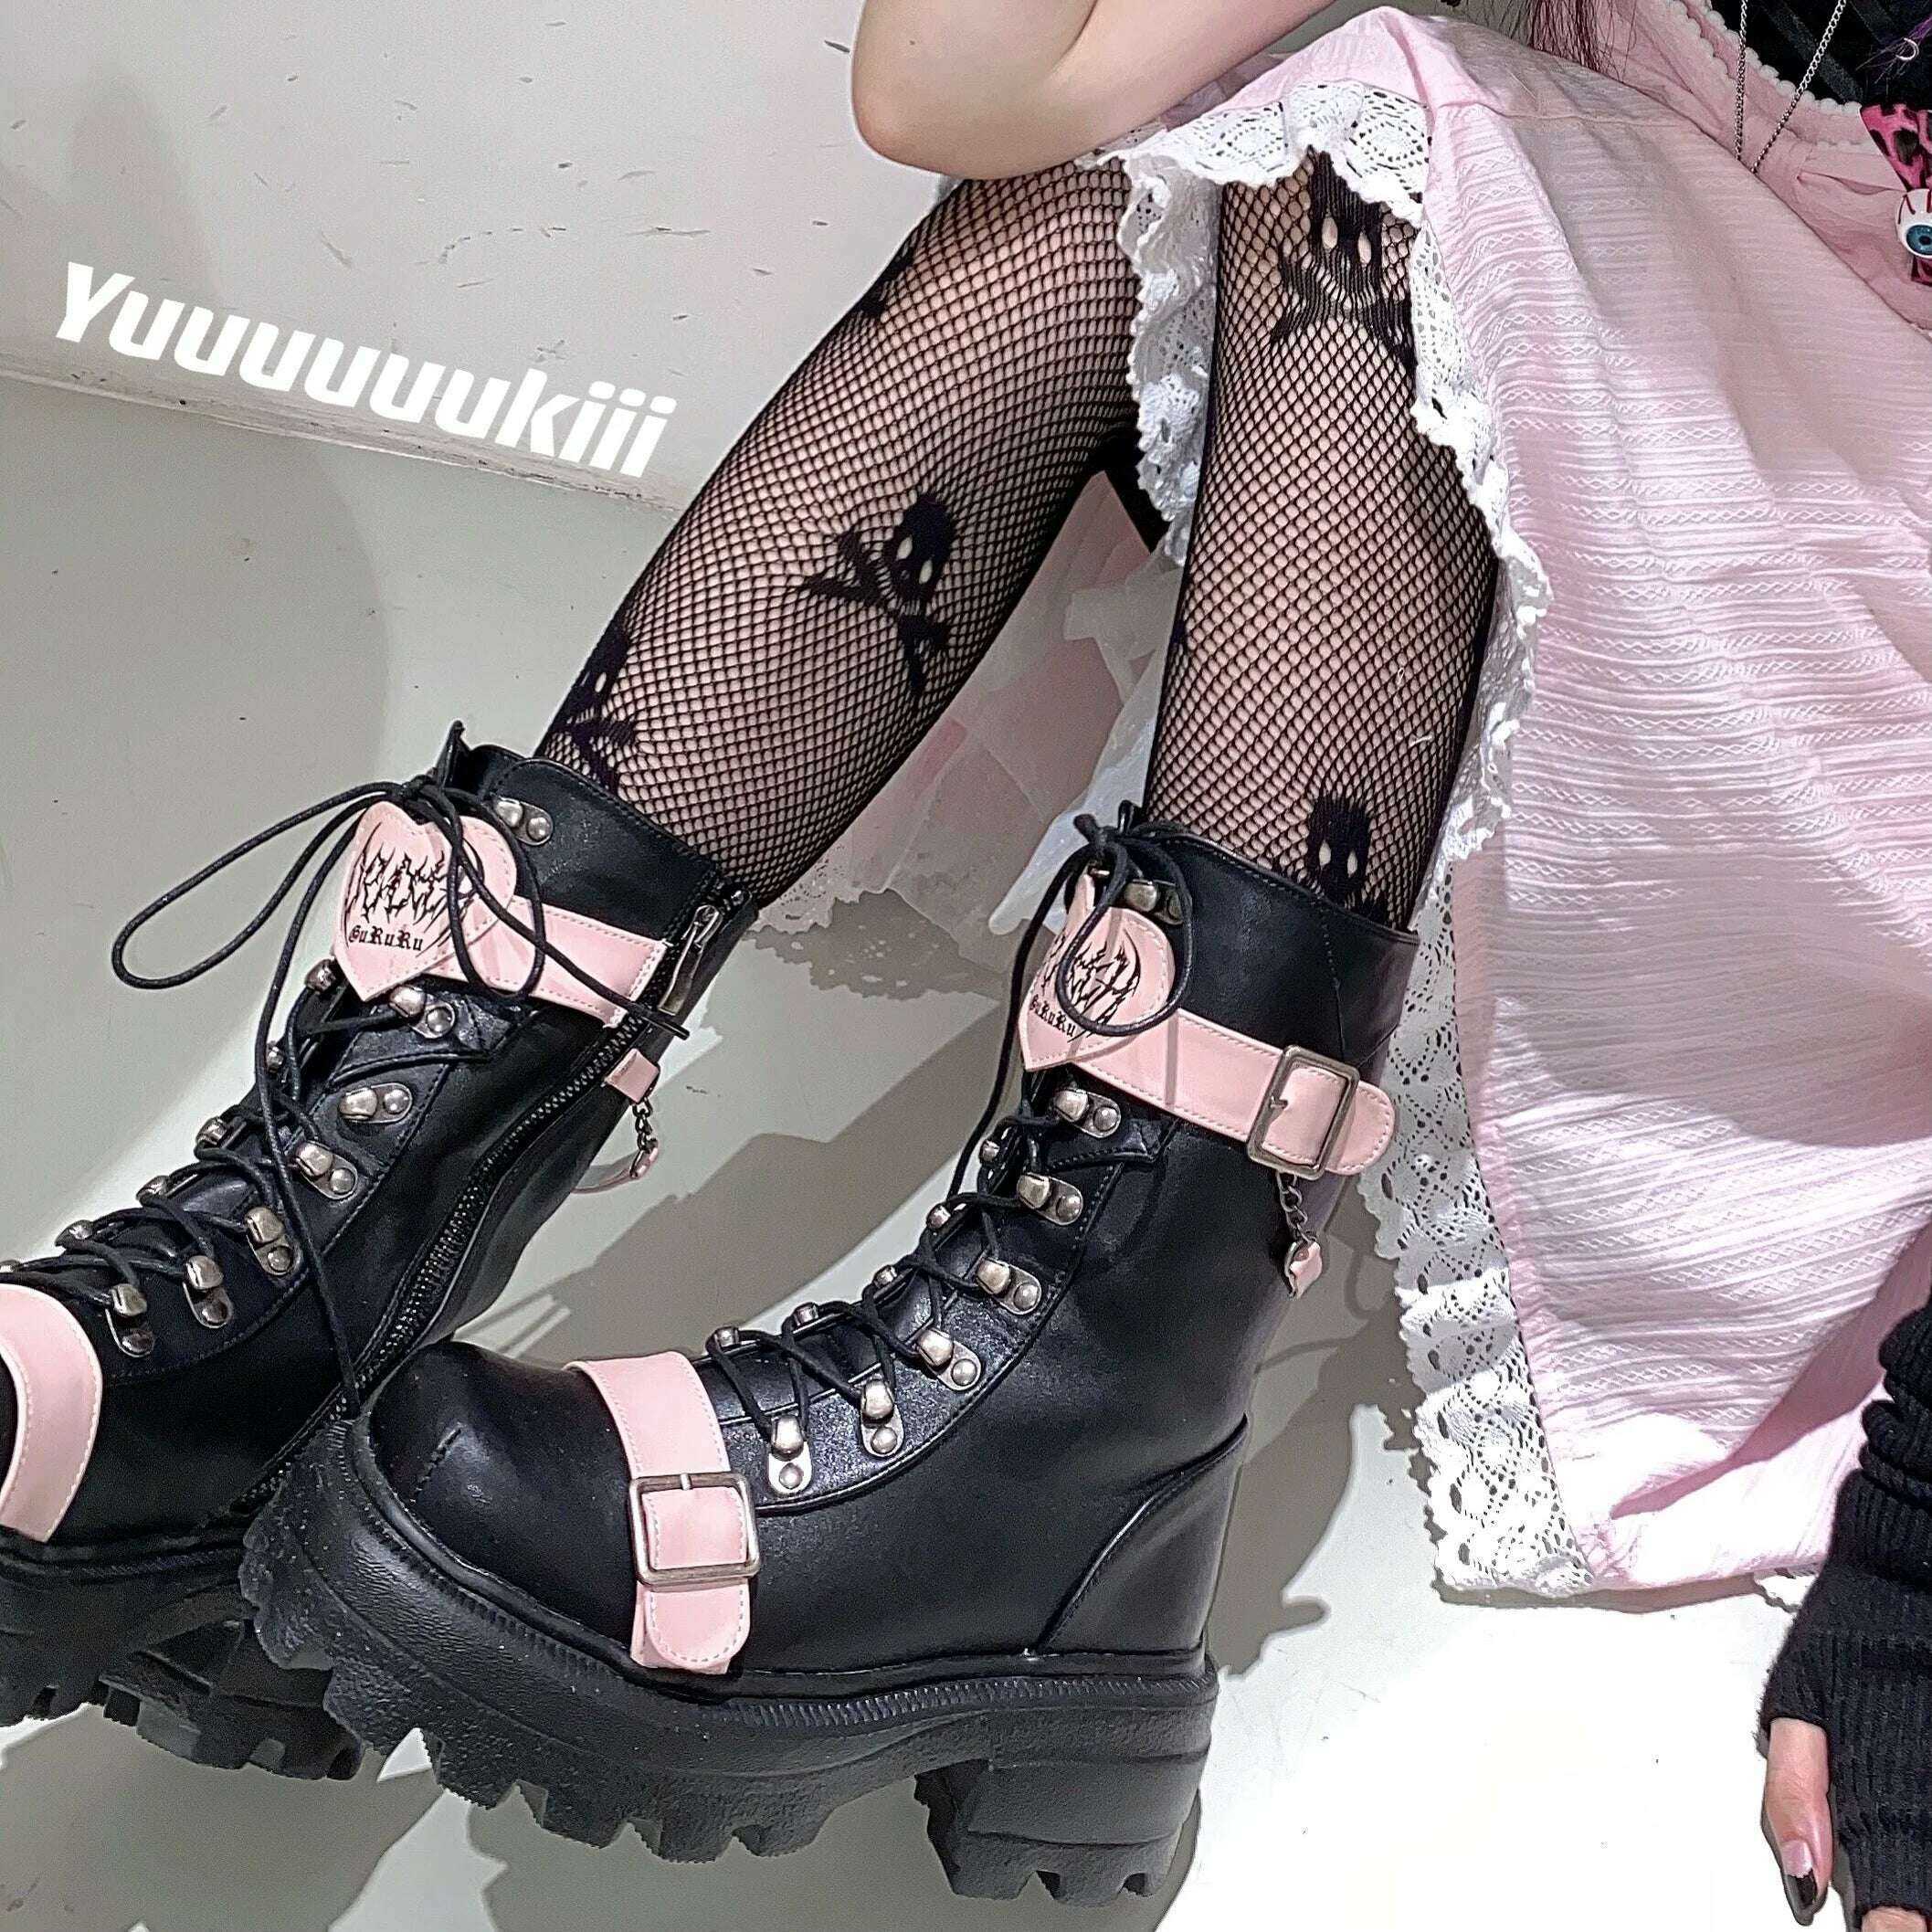 KIMLUD, COYOUNG Japanese Women Punk Rock Halloween Dark Buckle Gothic Thick Bottom Martin Boots Cosplay Lolita PU Leather Shoes, KIMLUD Womens Clothes